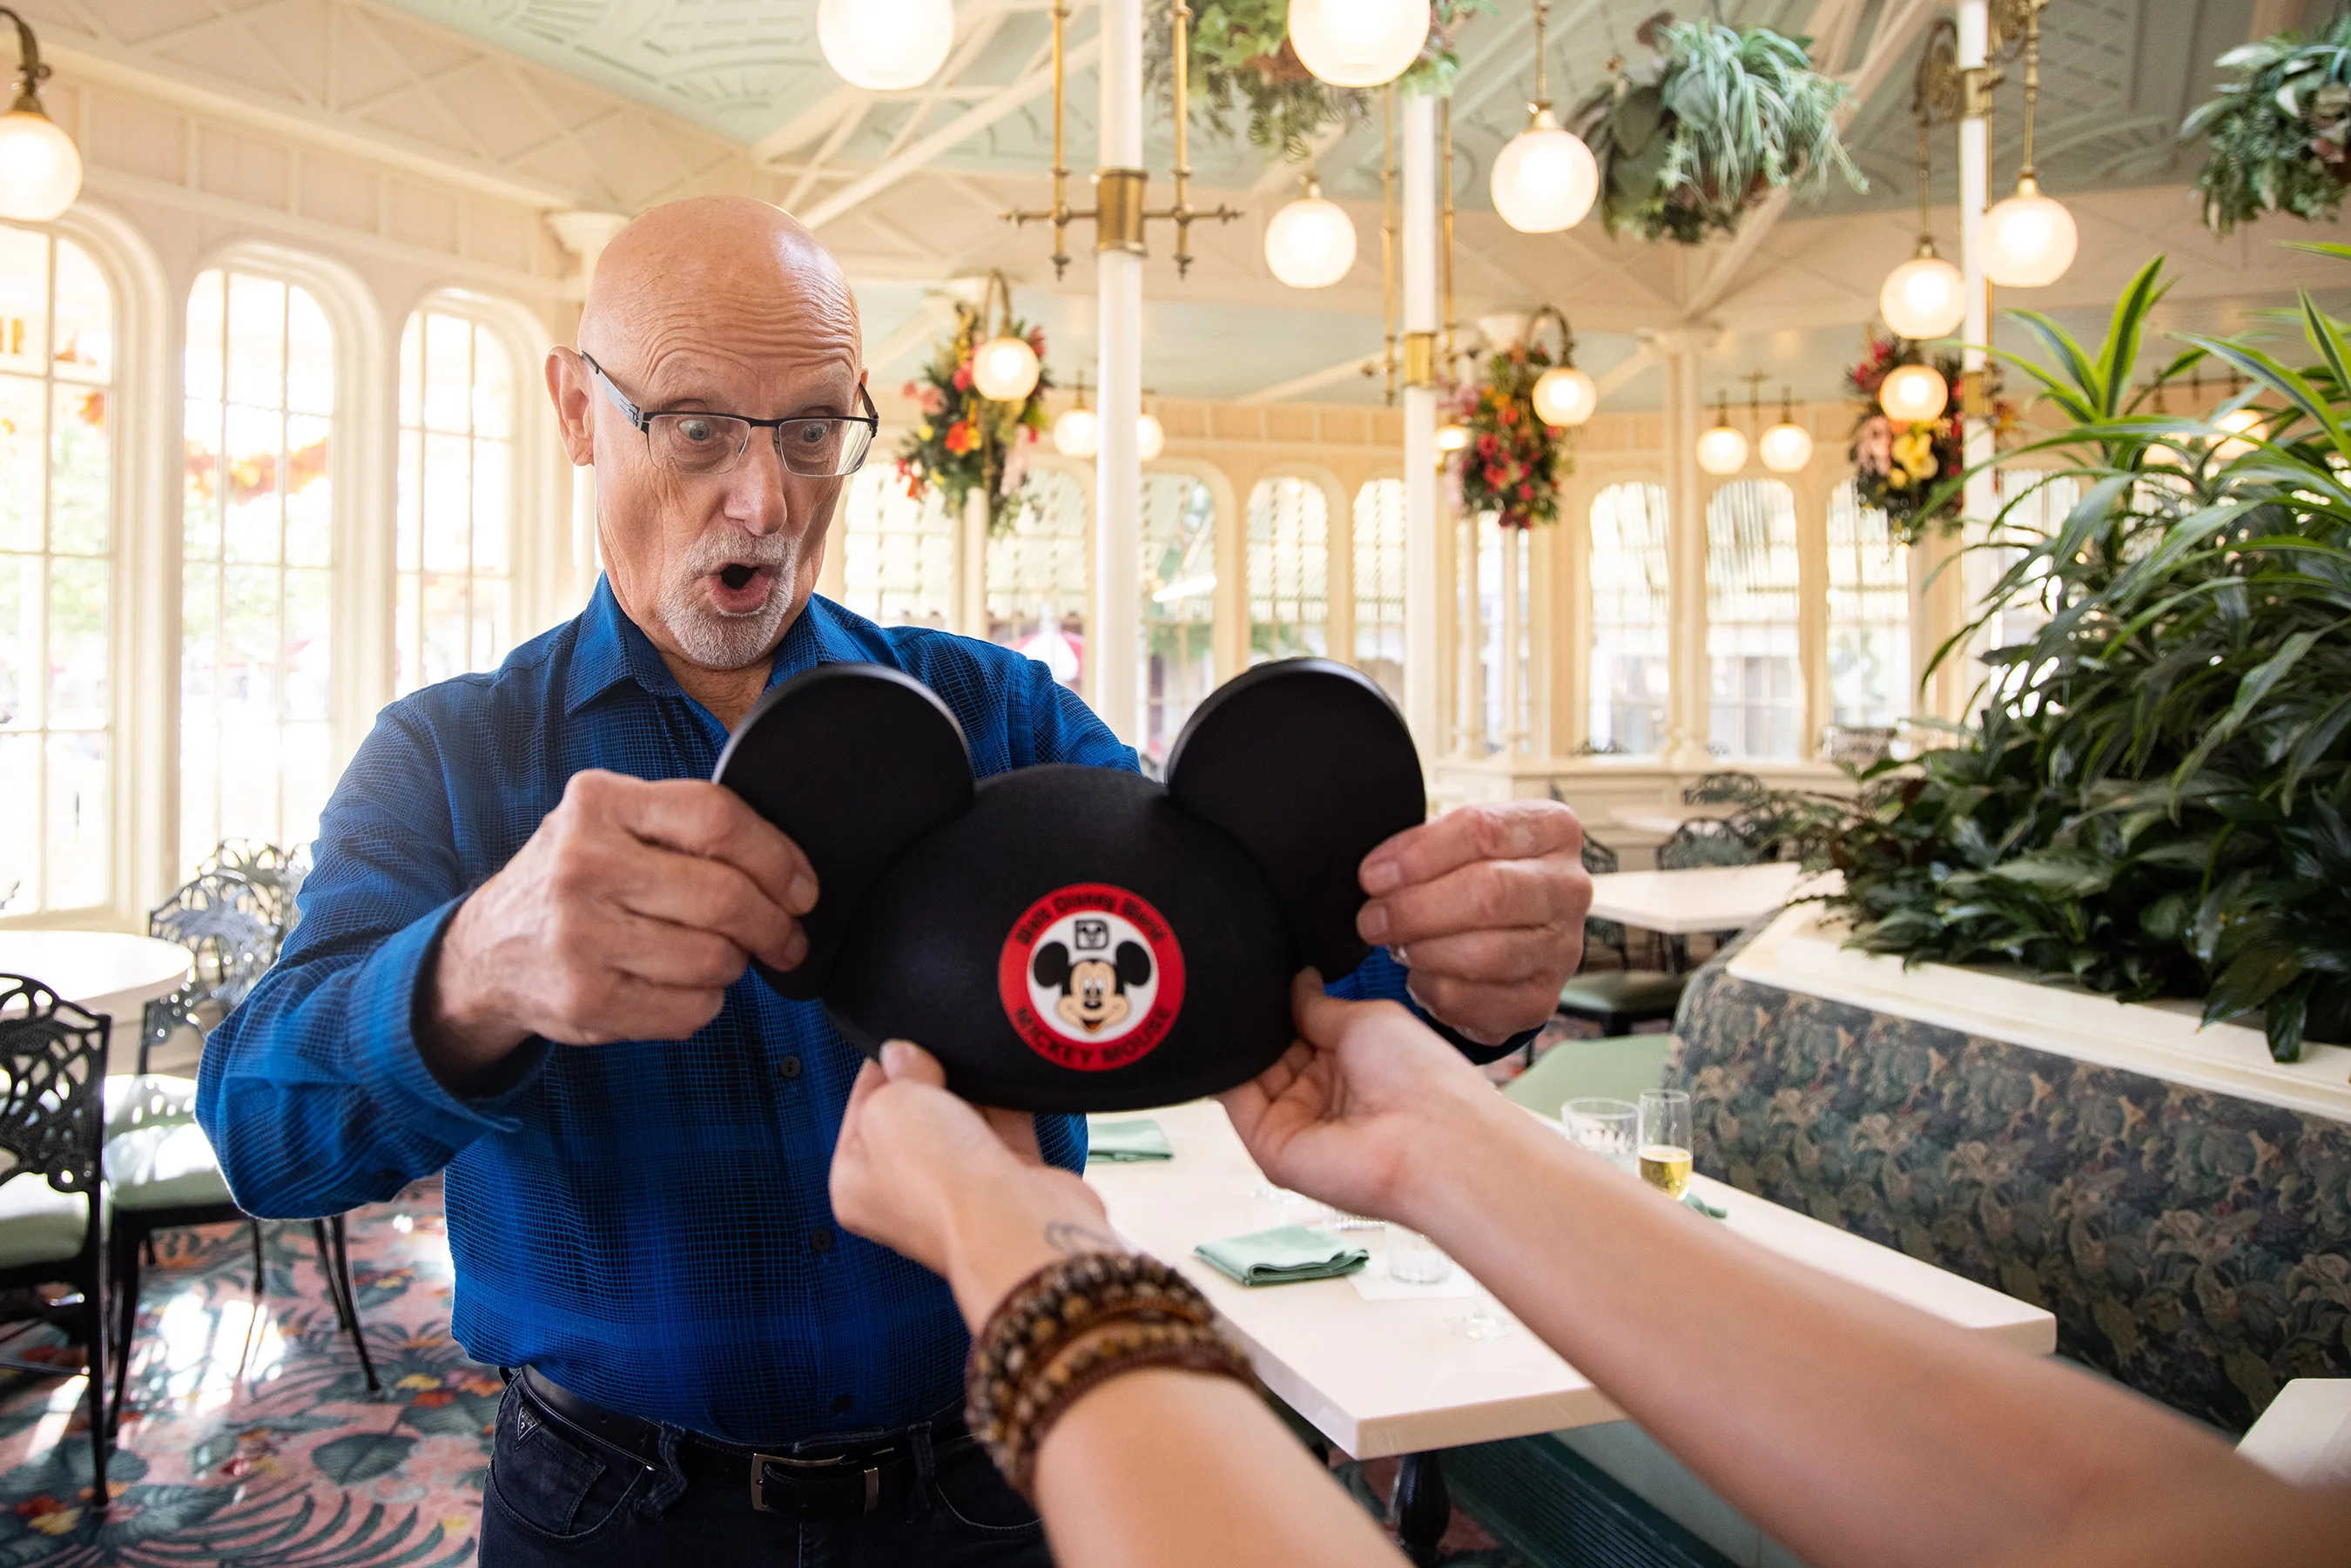 Cast member very excited to receive vintage Mickey ears